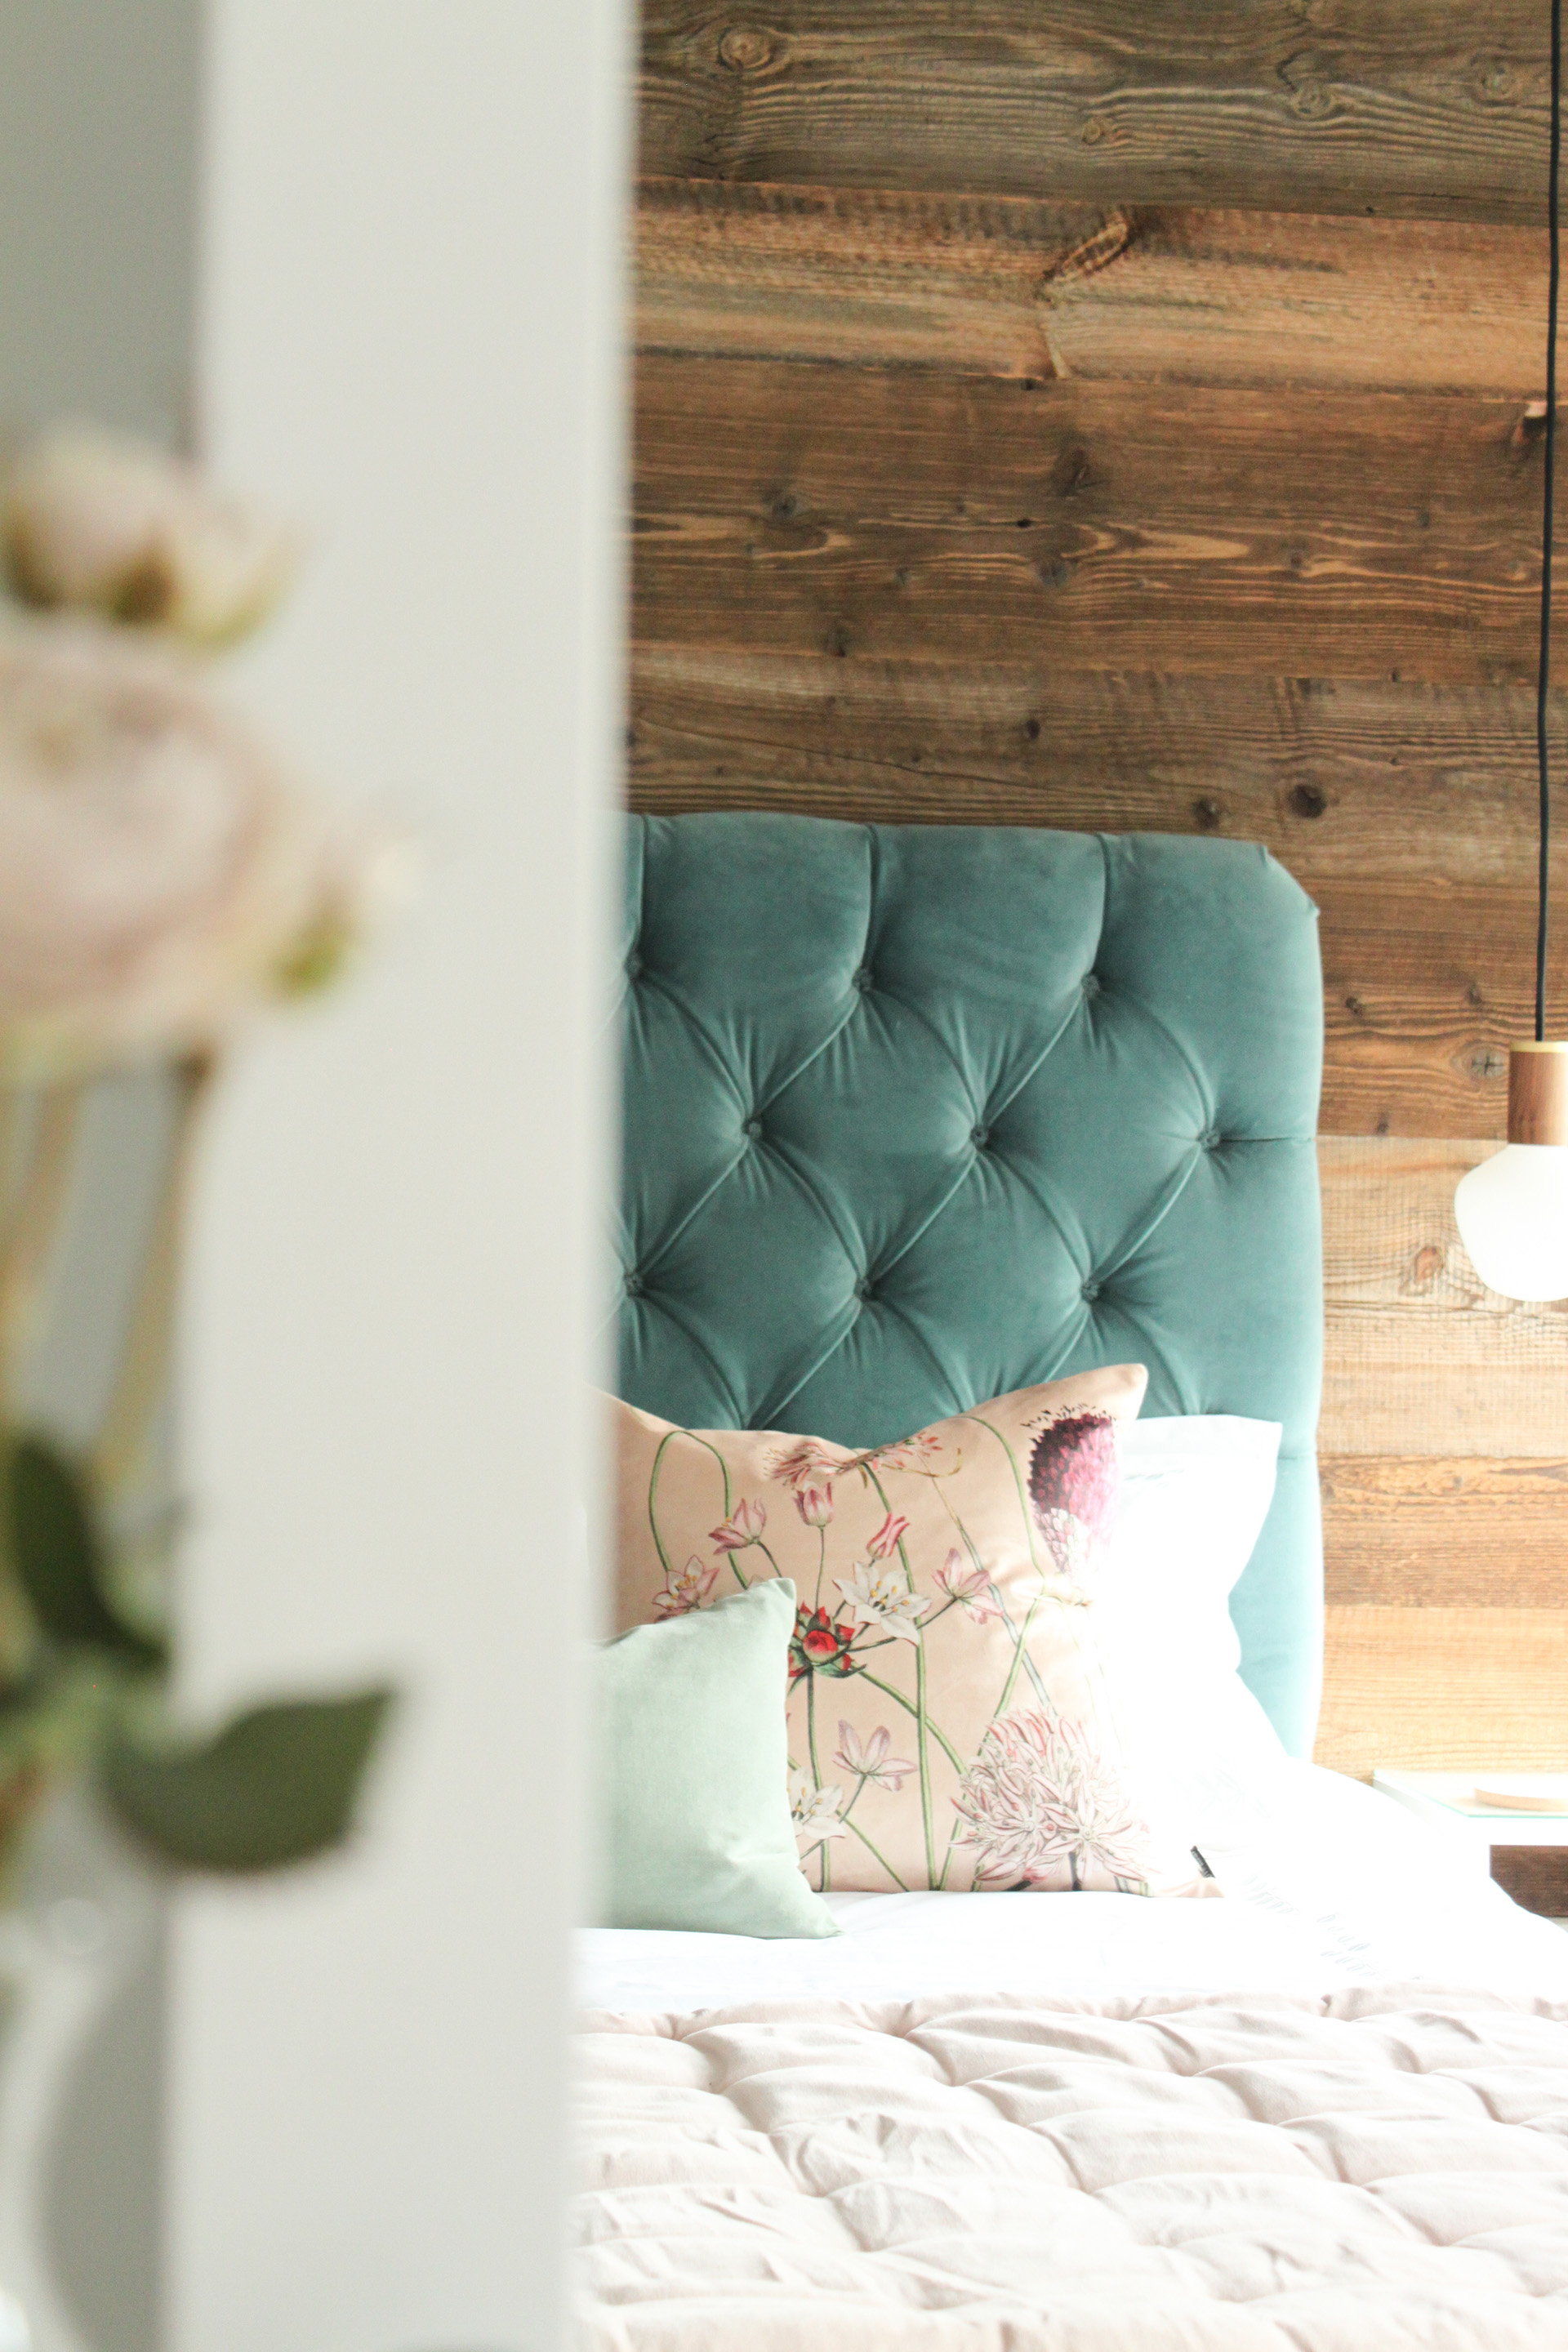 A reflected image of the rustic reclaimed wood floor to ceiling feature wall. A teal velvet headboard with bed dressing on a pale pink velvet throw and scatter cushions. A tala pendant light hangs from the ceiling above the bespoke bedside cabinets.